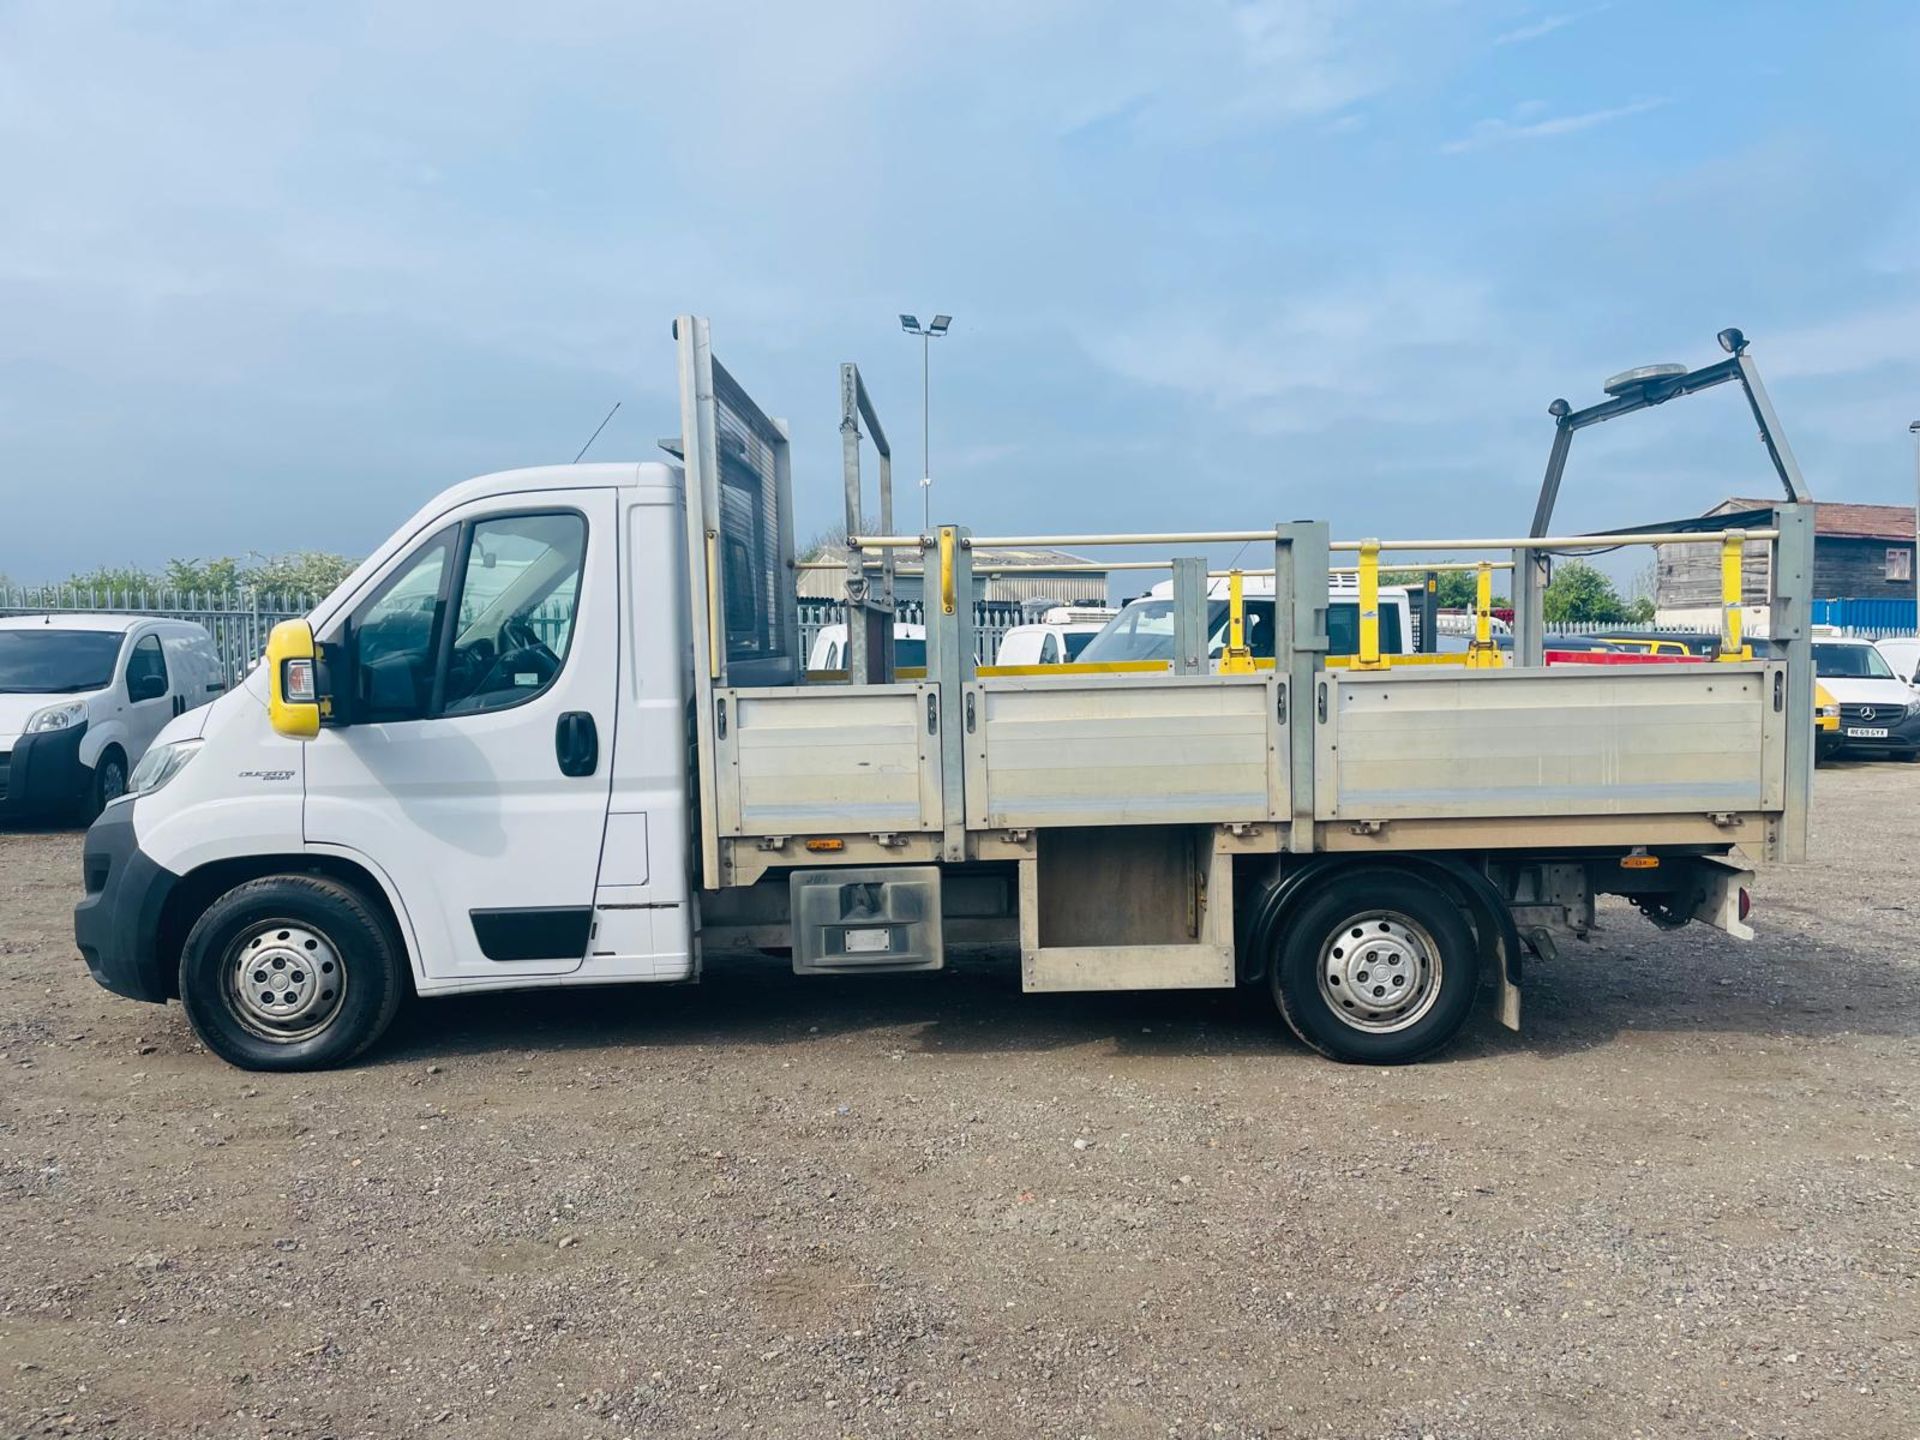 Fiat Ducato 35 Maxi 2.3 MultiJet 130 L3H1 Dropside 2019 '69 Reg'-1 Former keepers - Only 76,029 - Image 4 of 27